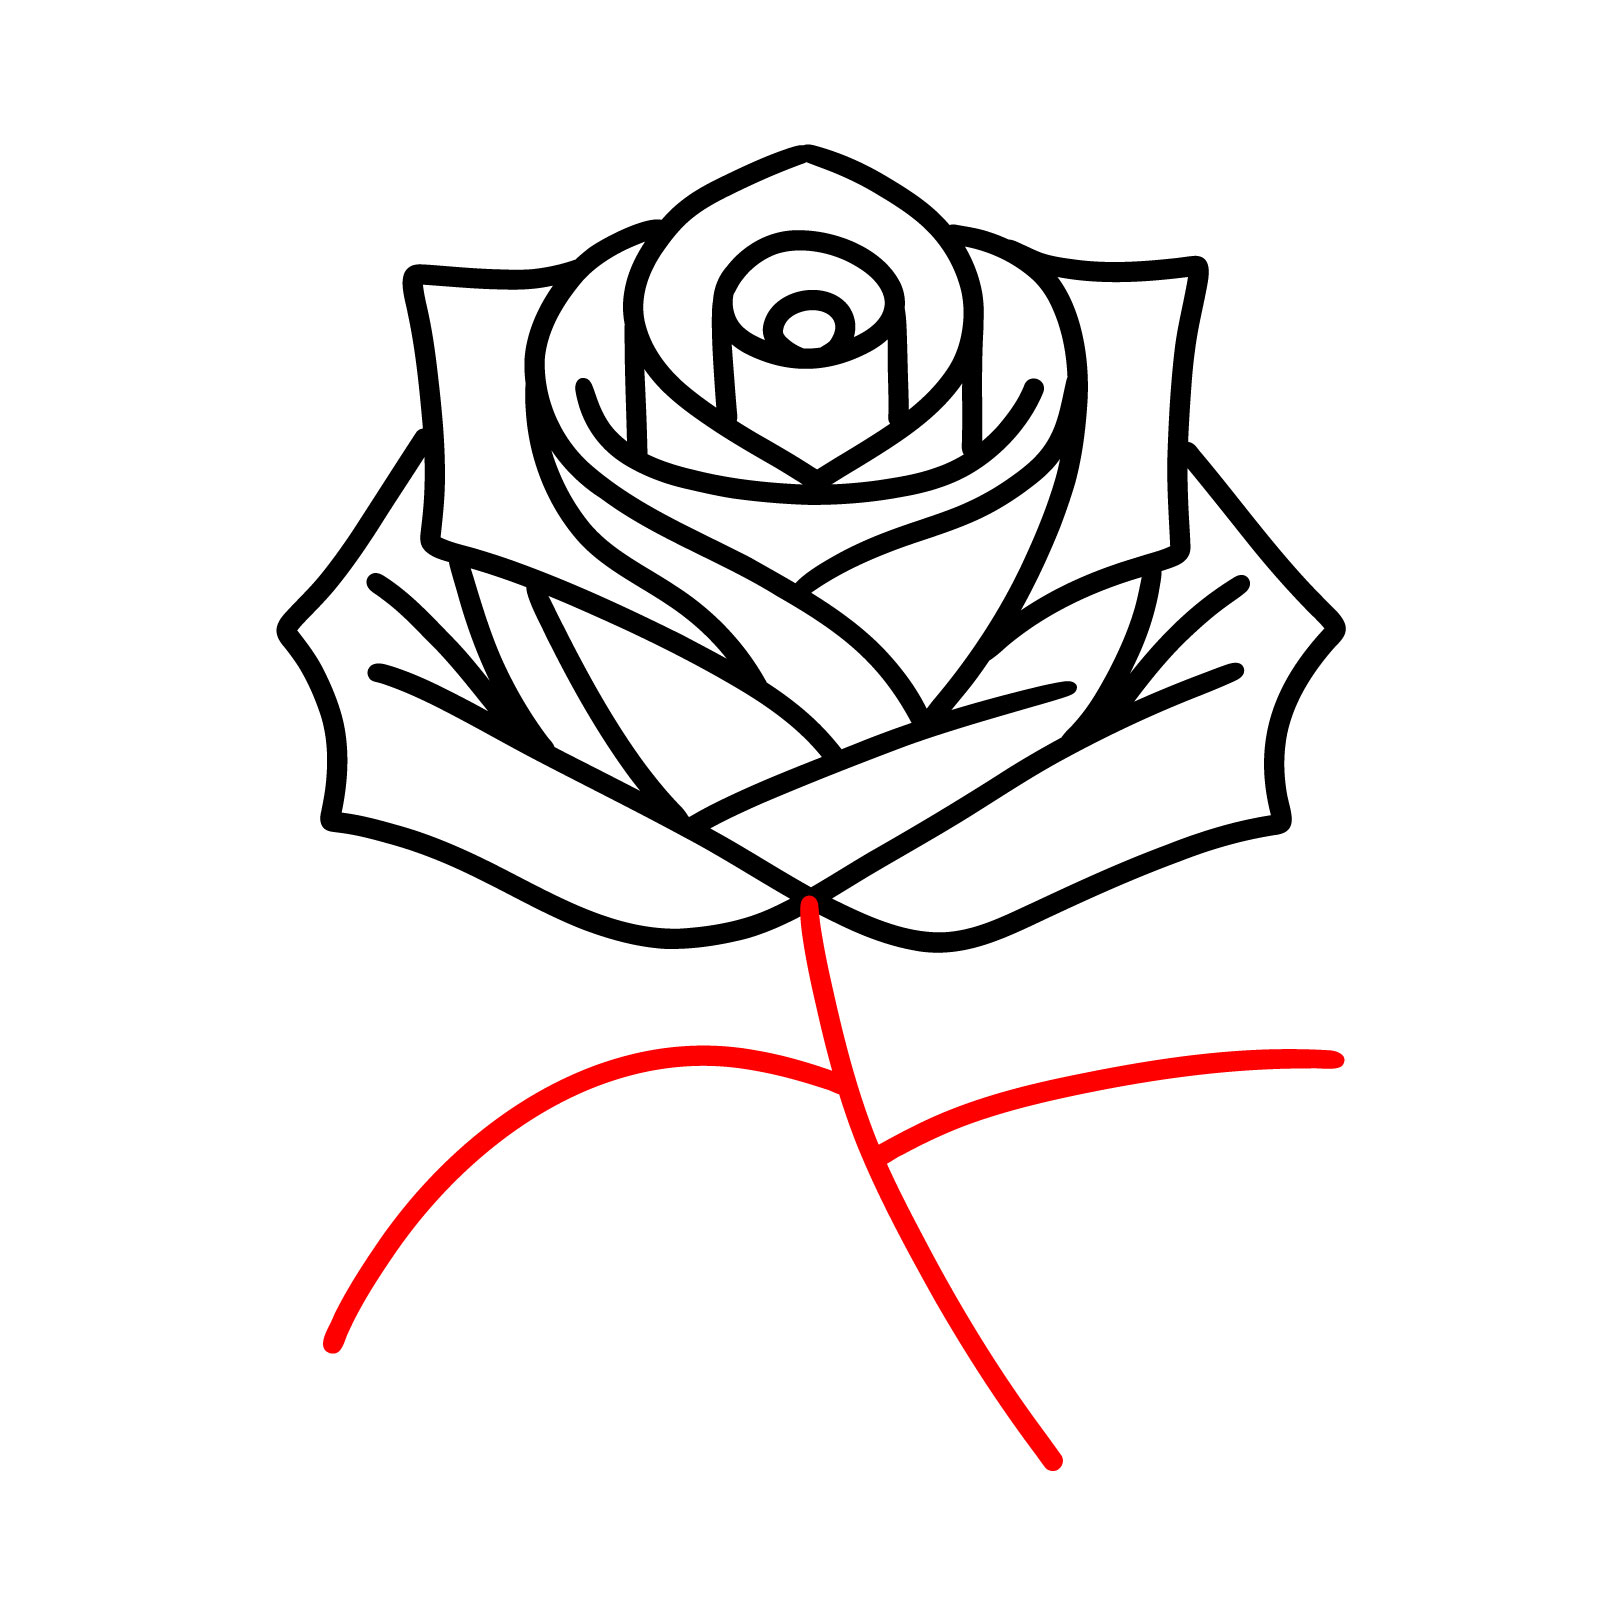 How to Draw a Rose Easy | Drawings, Roses drawing, Rosé cartoon